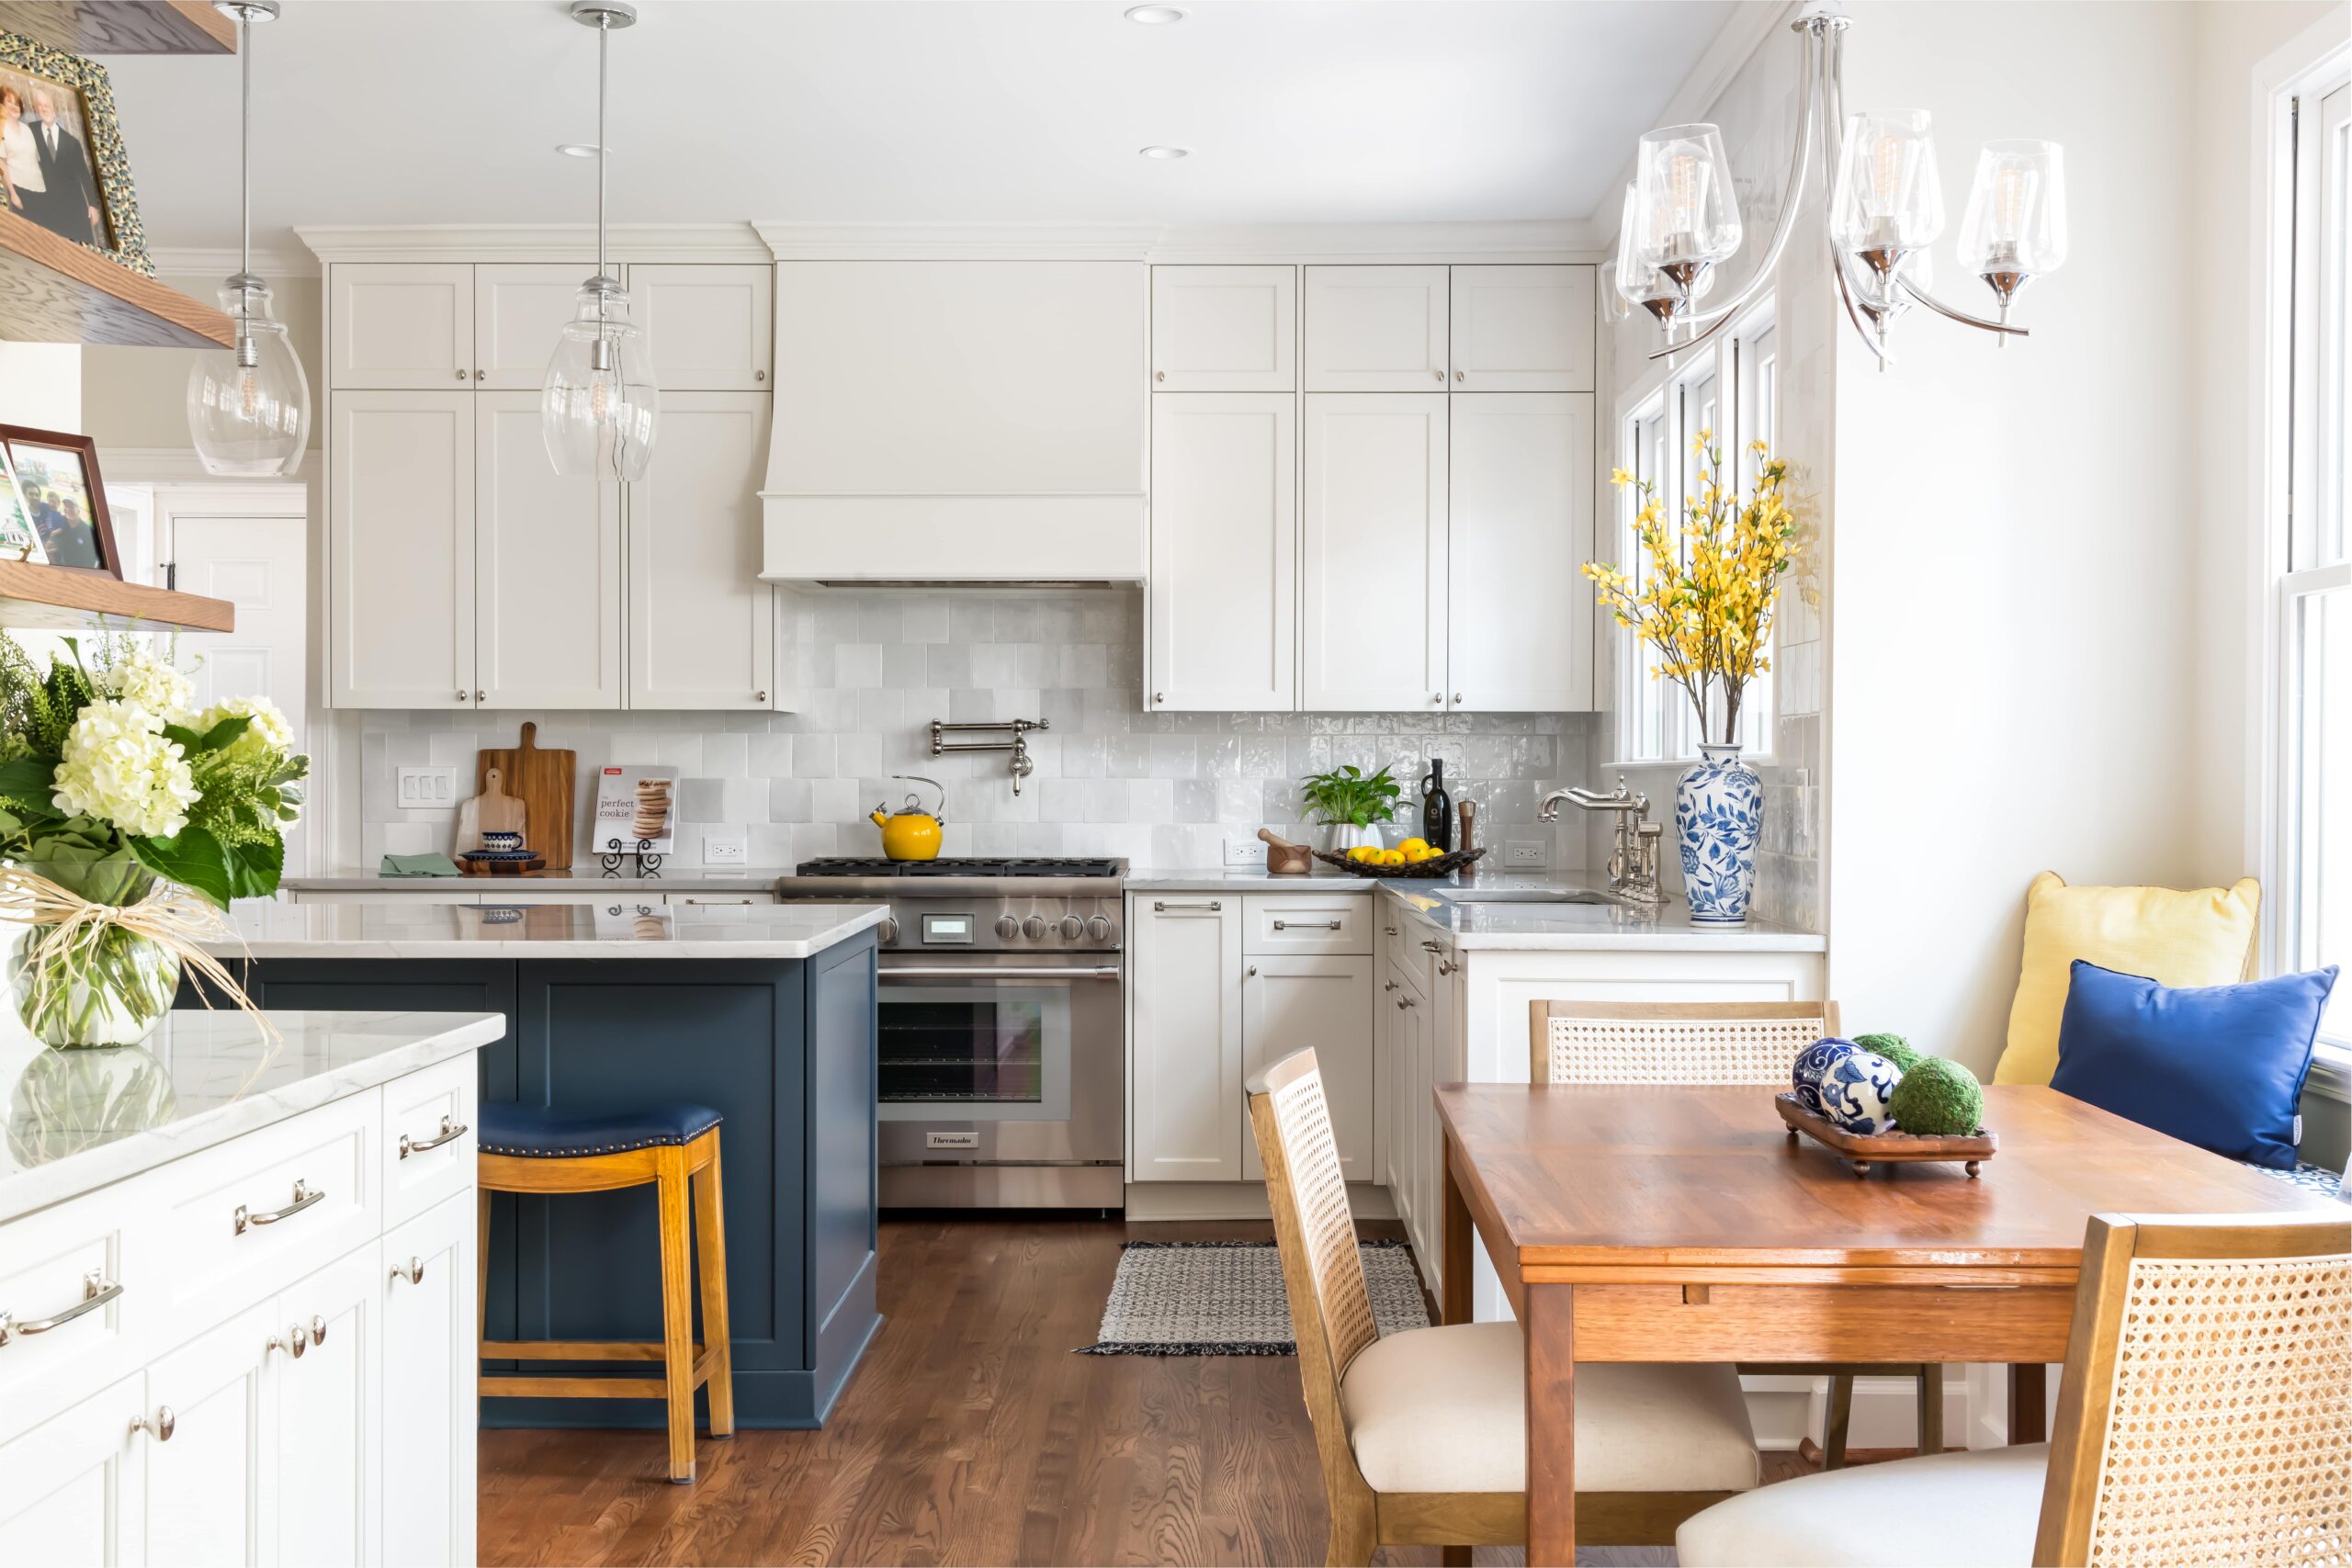 Home remodeling trends 2022 white kitchen